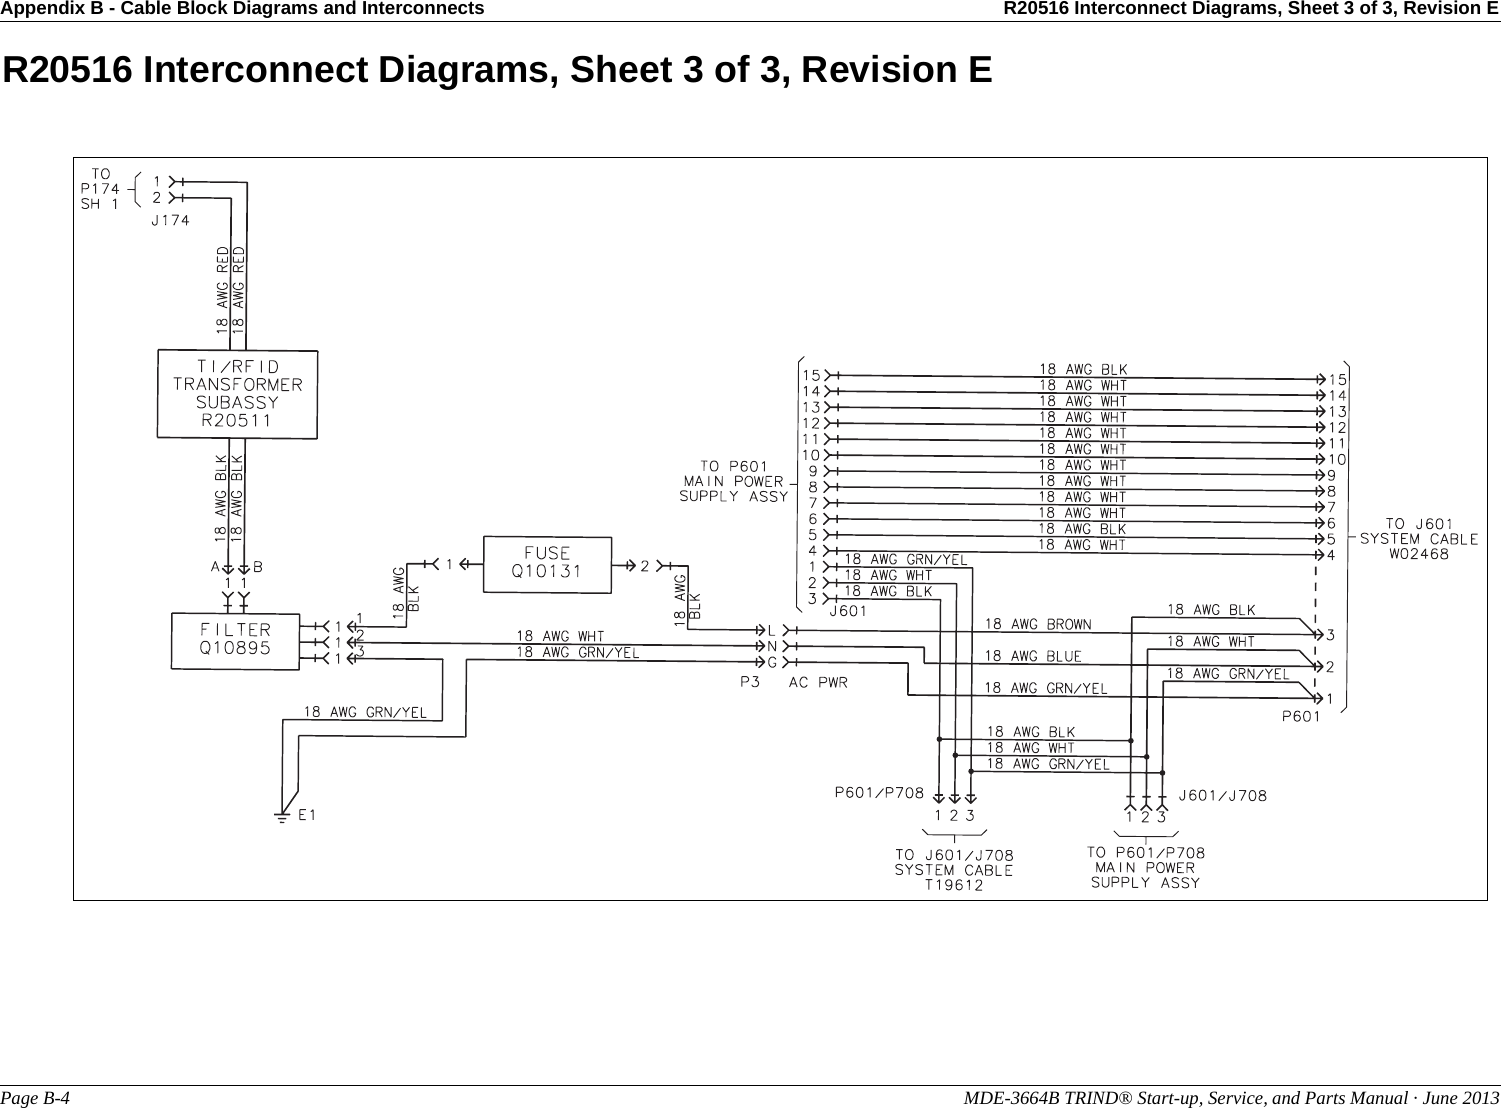 Appendix B - Cable Block Diagrams and Interconnects R20516 Interconnect Diagrams, Sheet 3 of 3, Revision EPage B-4                                                                                                               MDE-3664B TRIND® Start-up, Service, and Parts Manual · June 2013R20516 Interconnect Diagrams, Sheet 3 of 3, Revision E